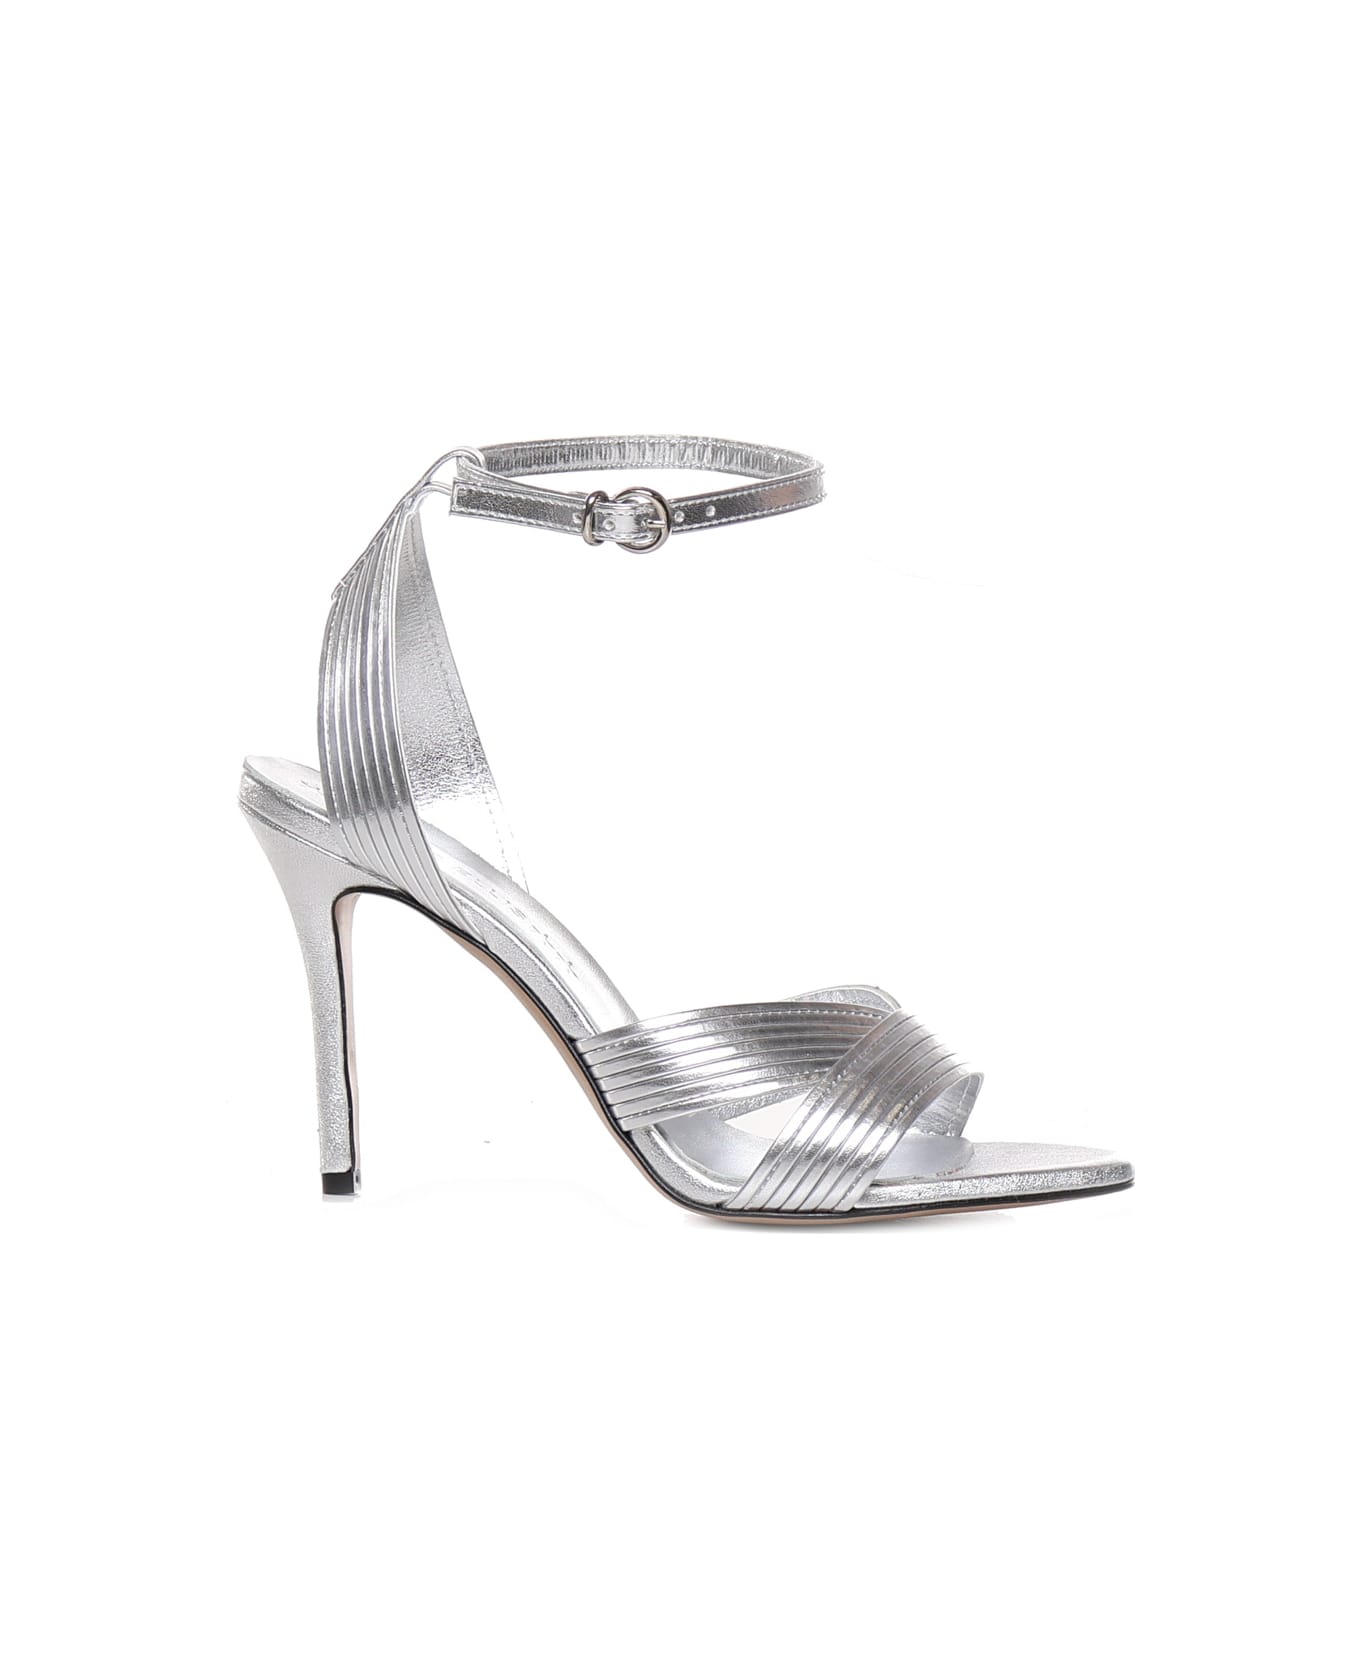 Marc Ellis Sandals With Heel And Lamè Bands - Silver